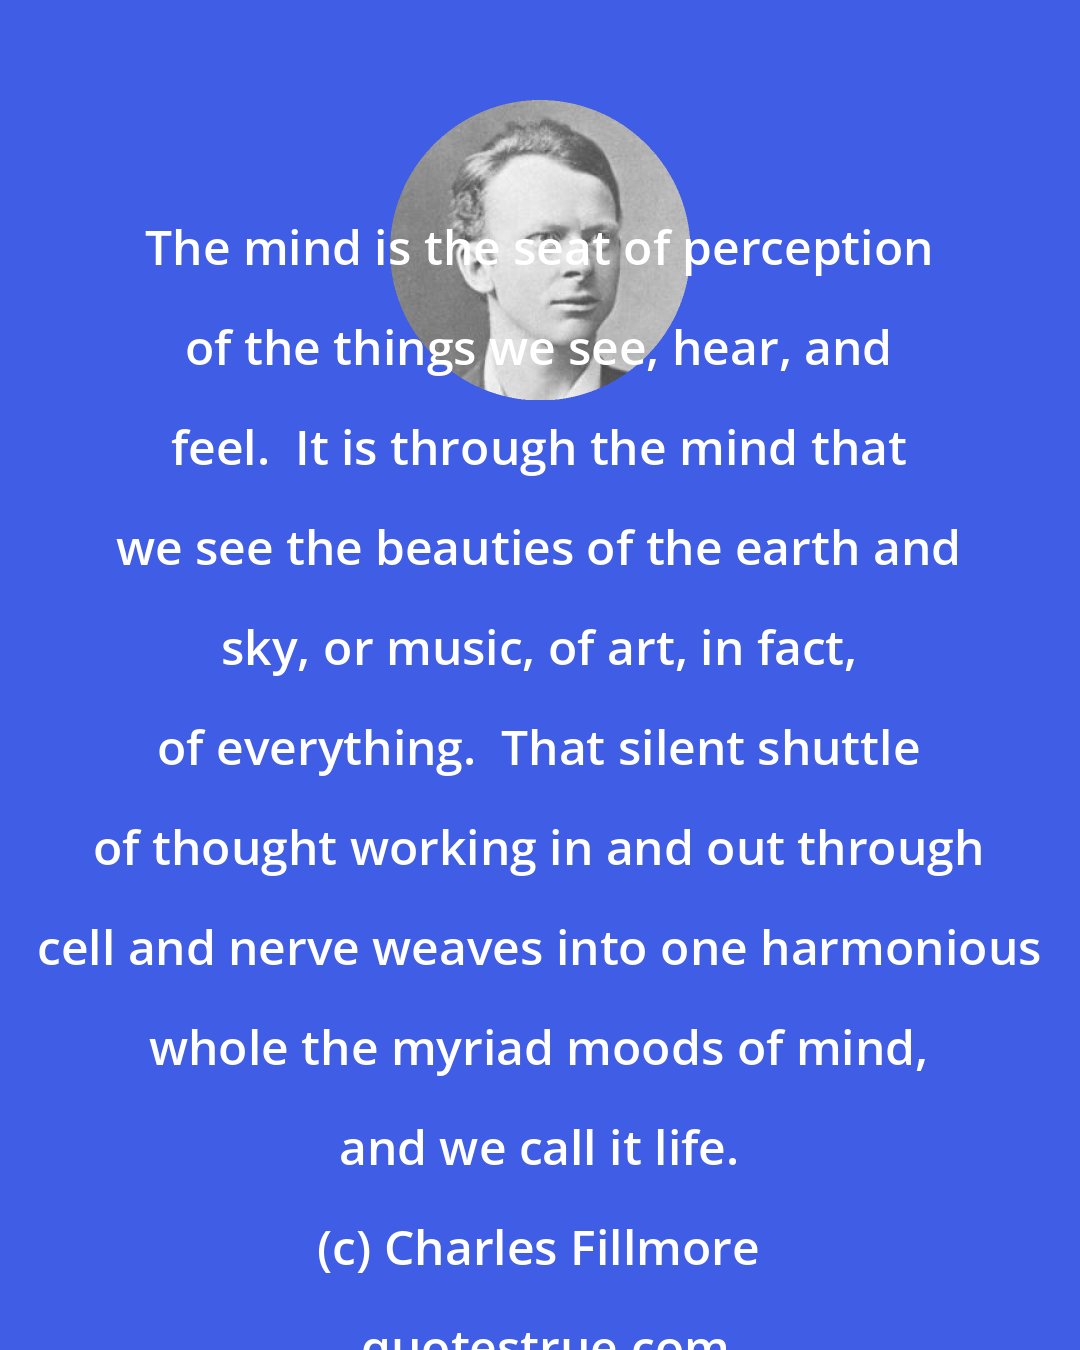 Charles Fillmore: The mind is the seat of perception of the things we see, hear, and feel.  It is through the mind that we see the beauties of the earth and sky, or music, of art, in fact, of everything.  That silent shuttle of thought working in and out through cell and nerve weaves into one harmonious whole the myriad moods of mind, and we call it life.